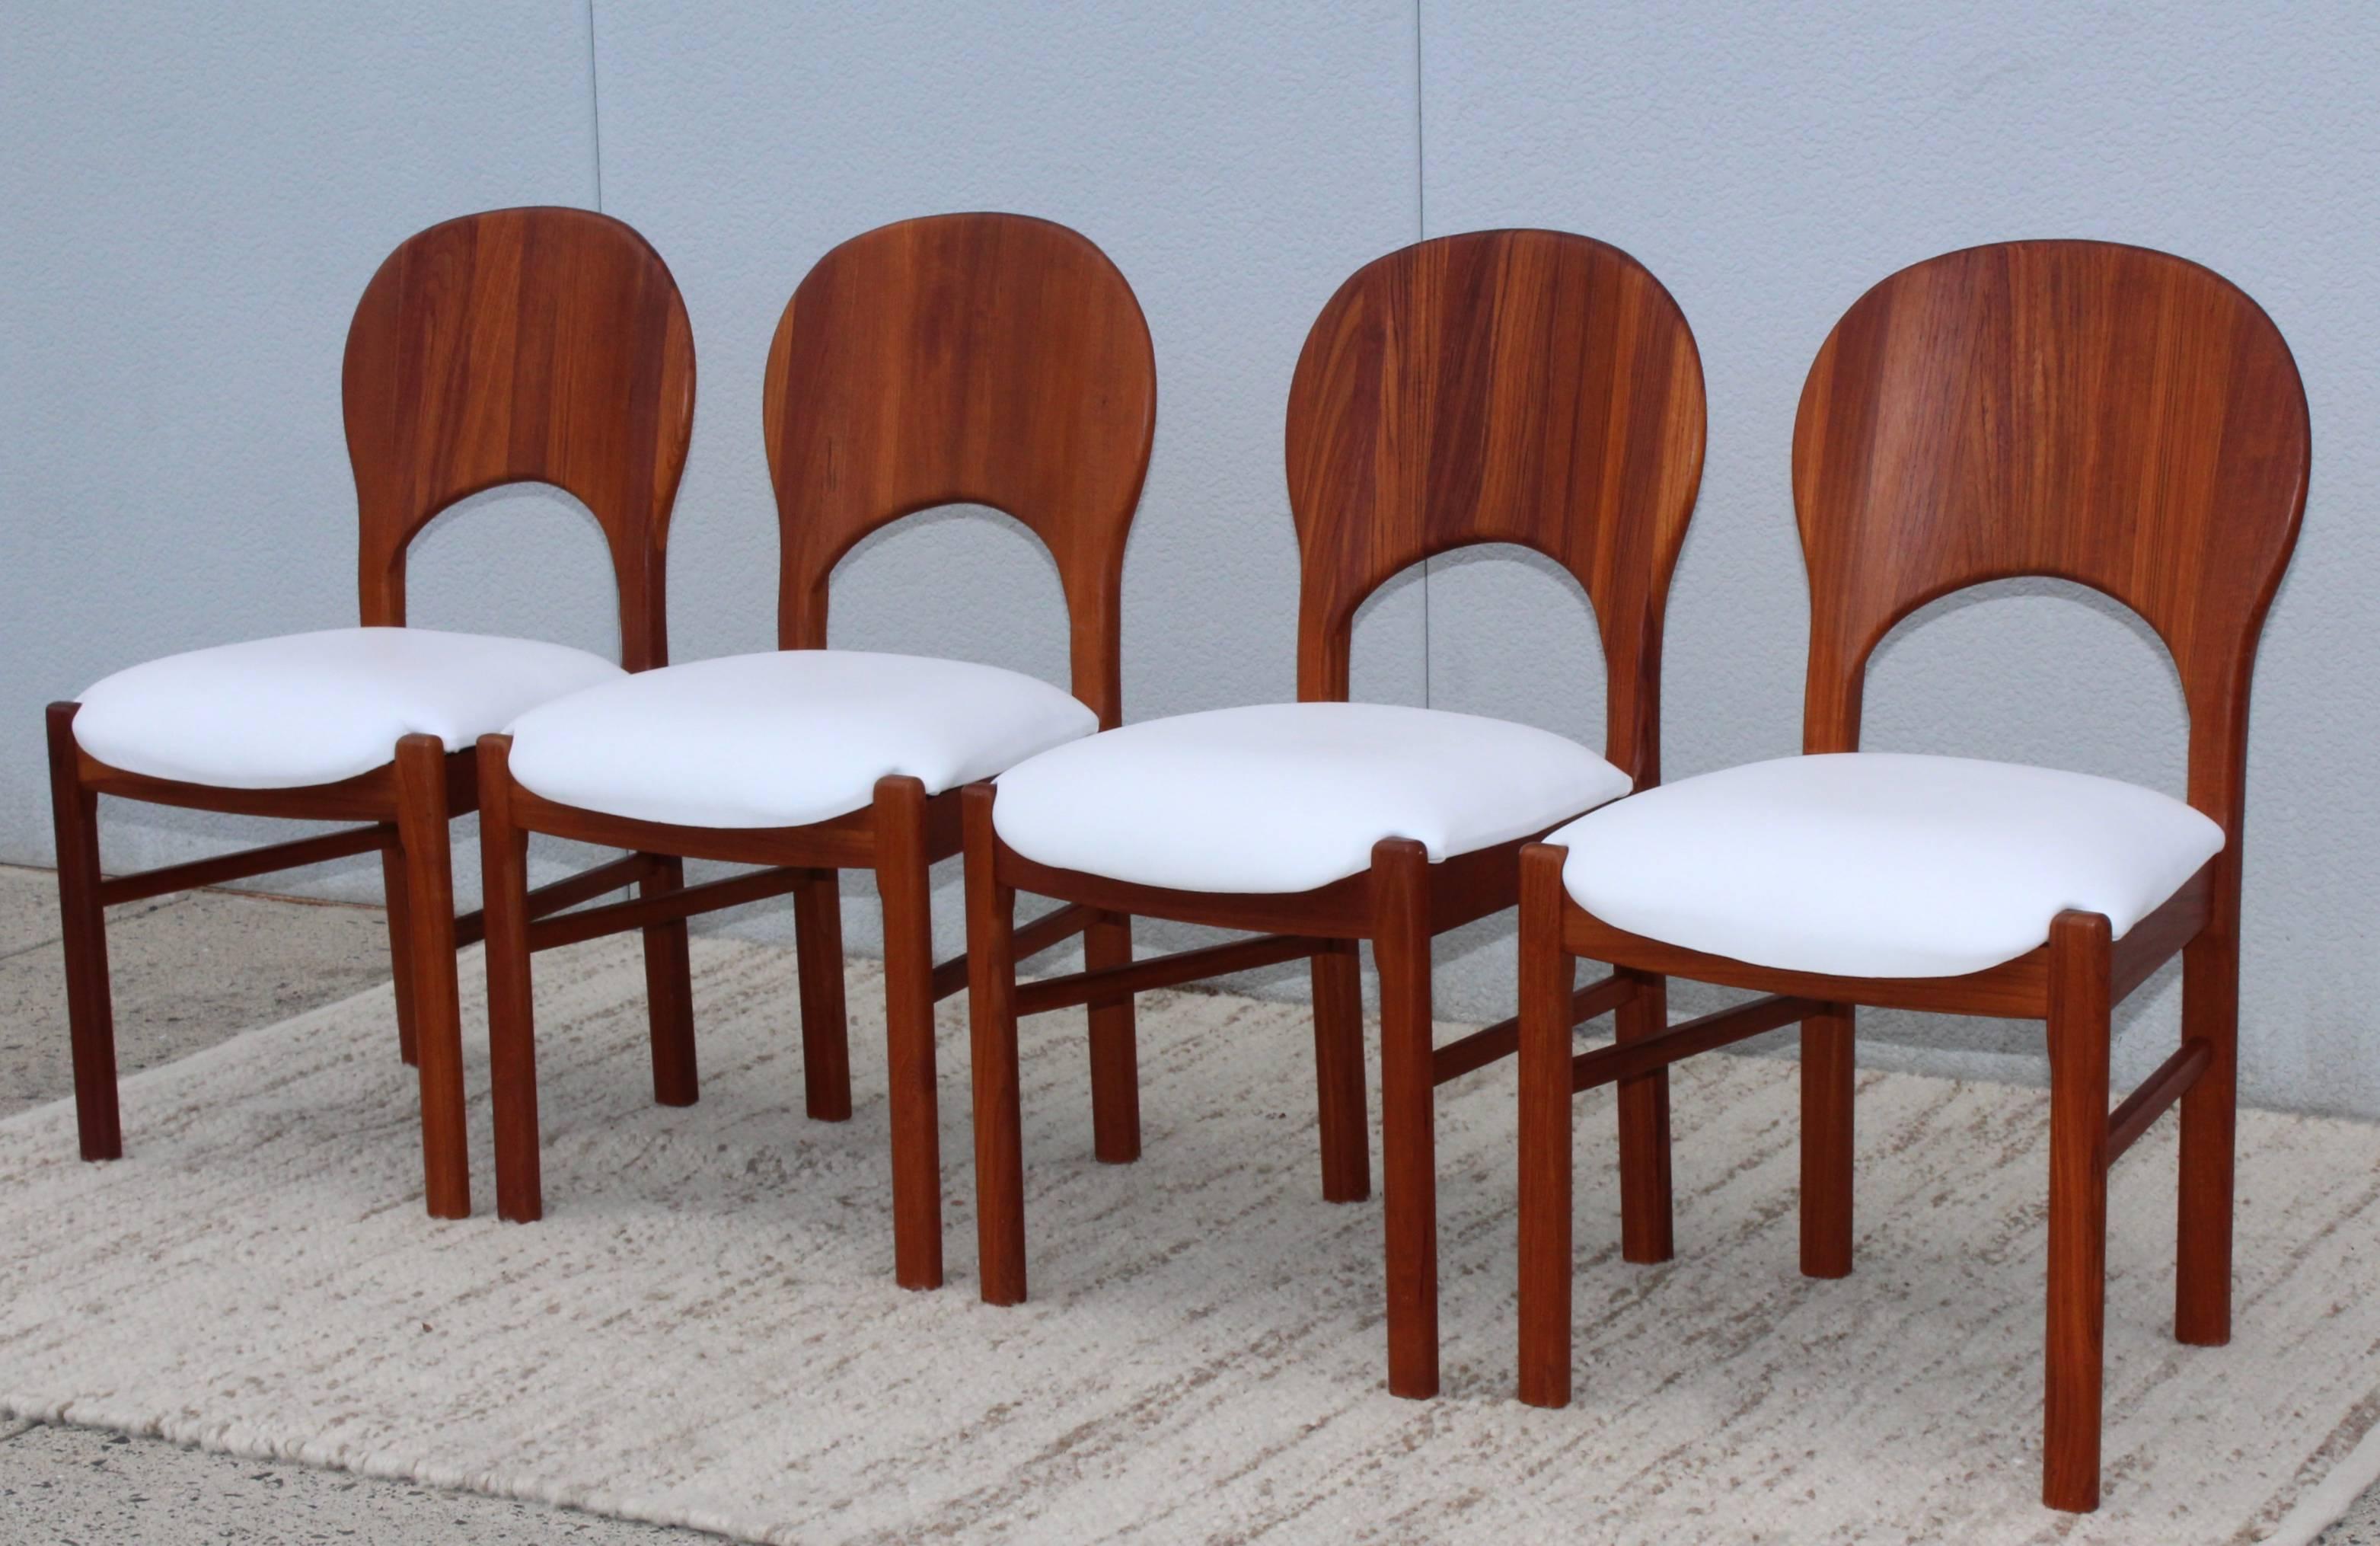 benny linden chairs for sale